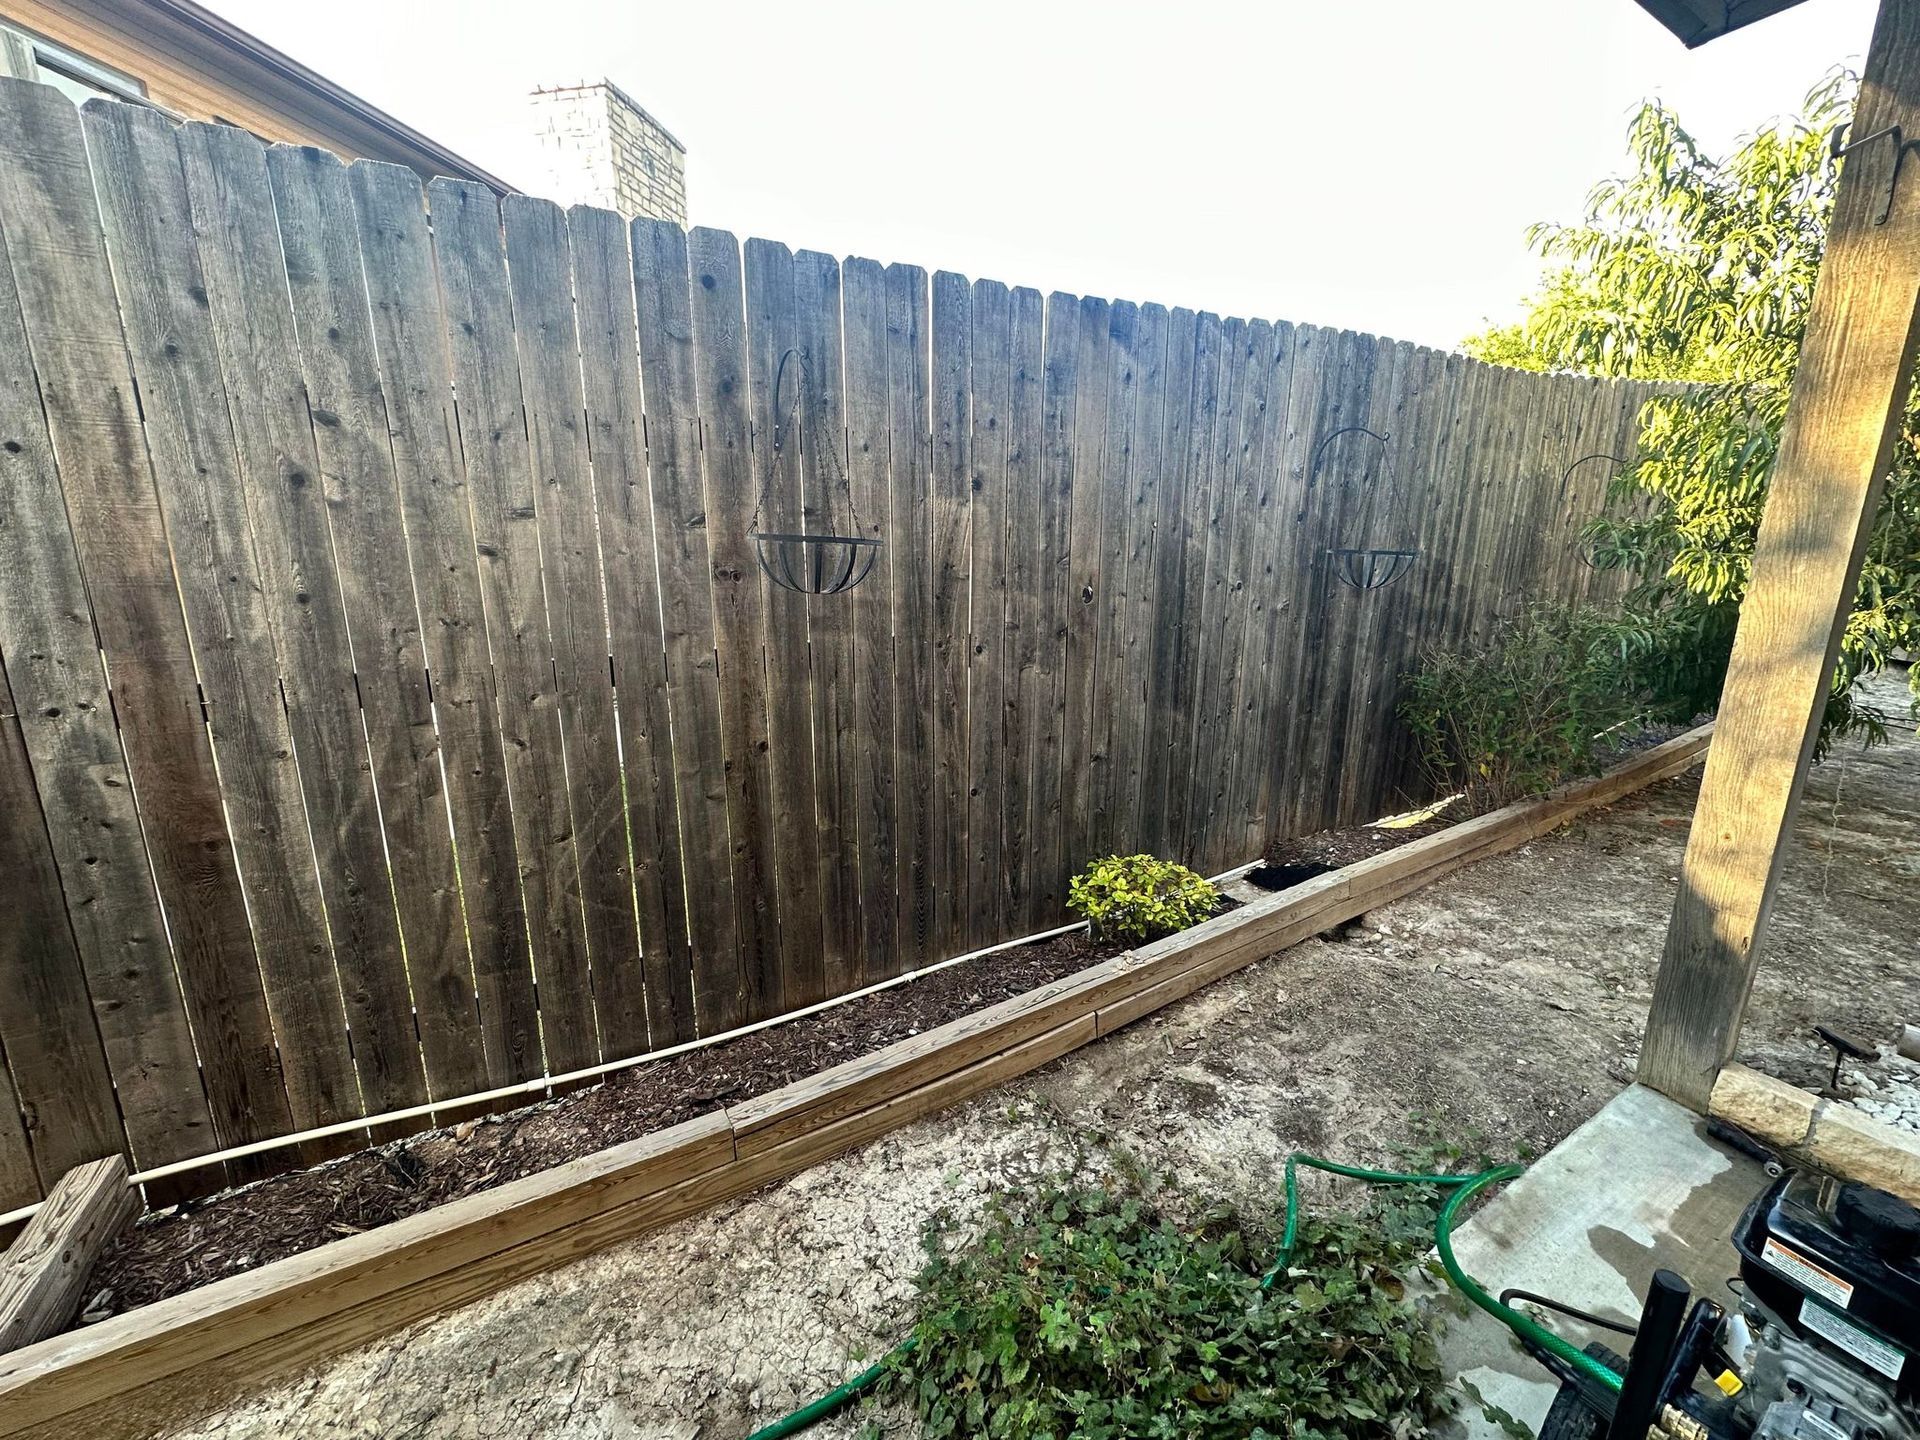 A wooden fence in a backyard with a hose in front of it.